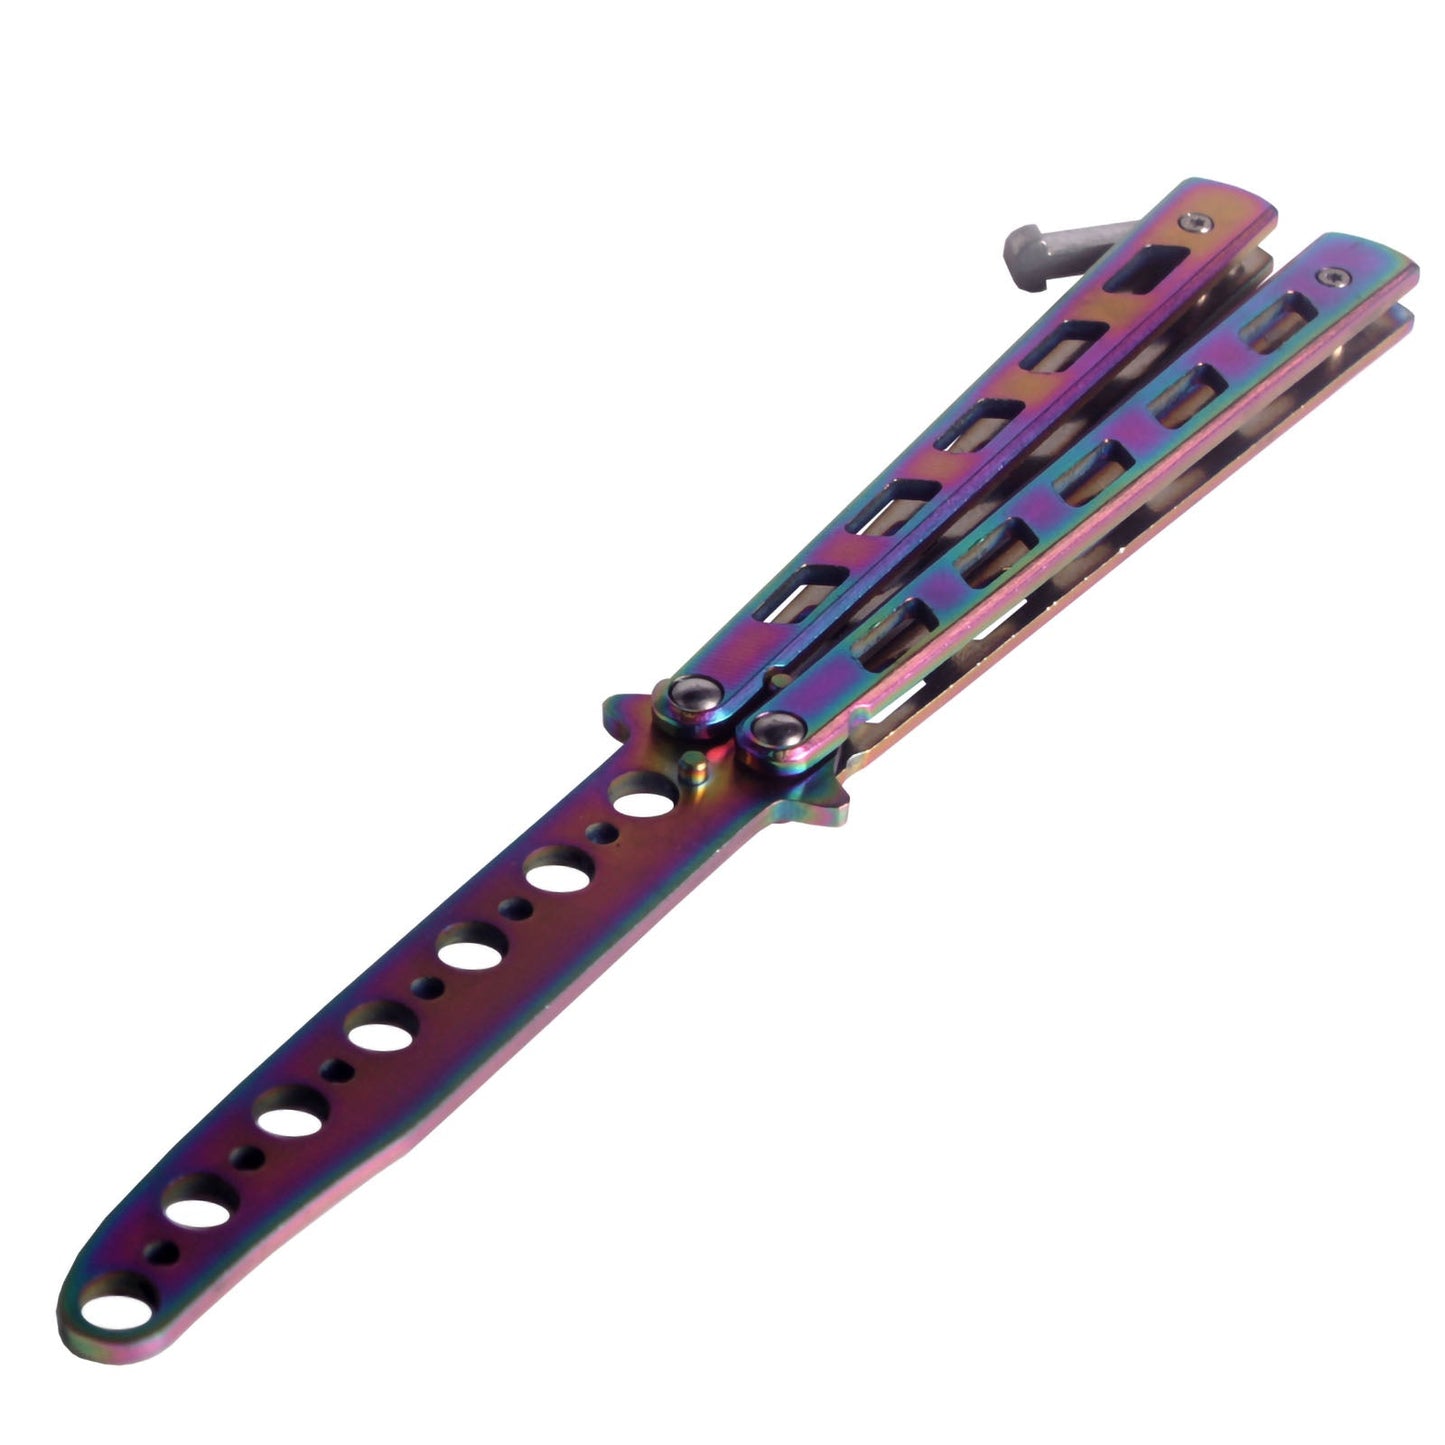 Andux Balisong Foldable Practice Trainer Tool CS/HDD11(ONLY Available in EU Countries)